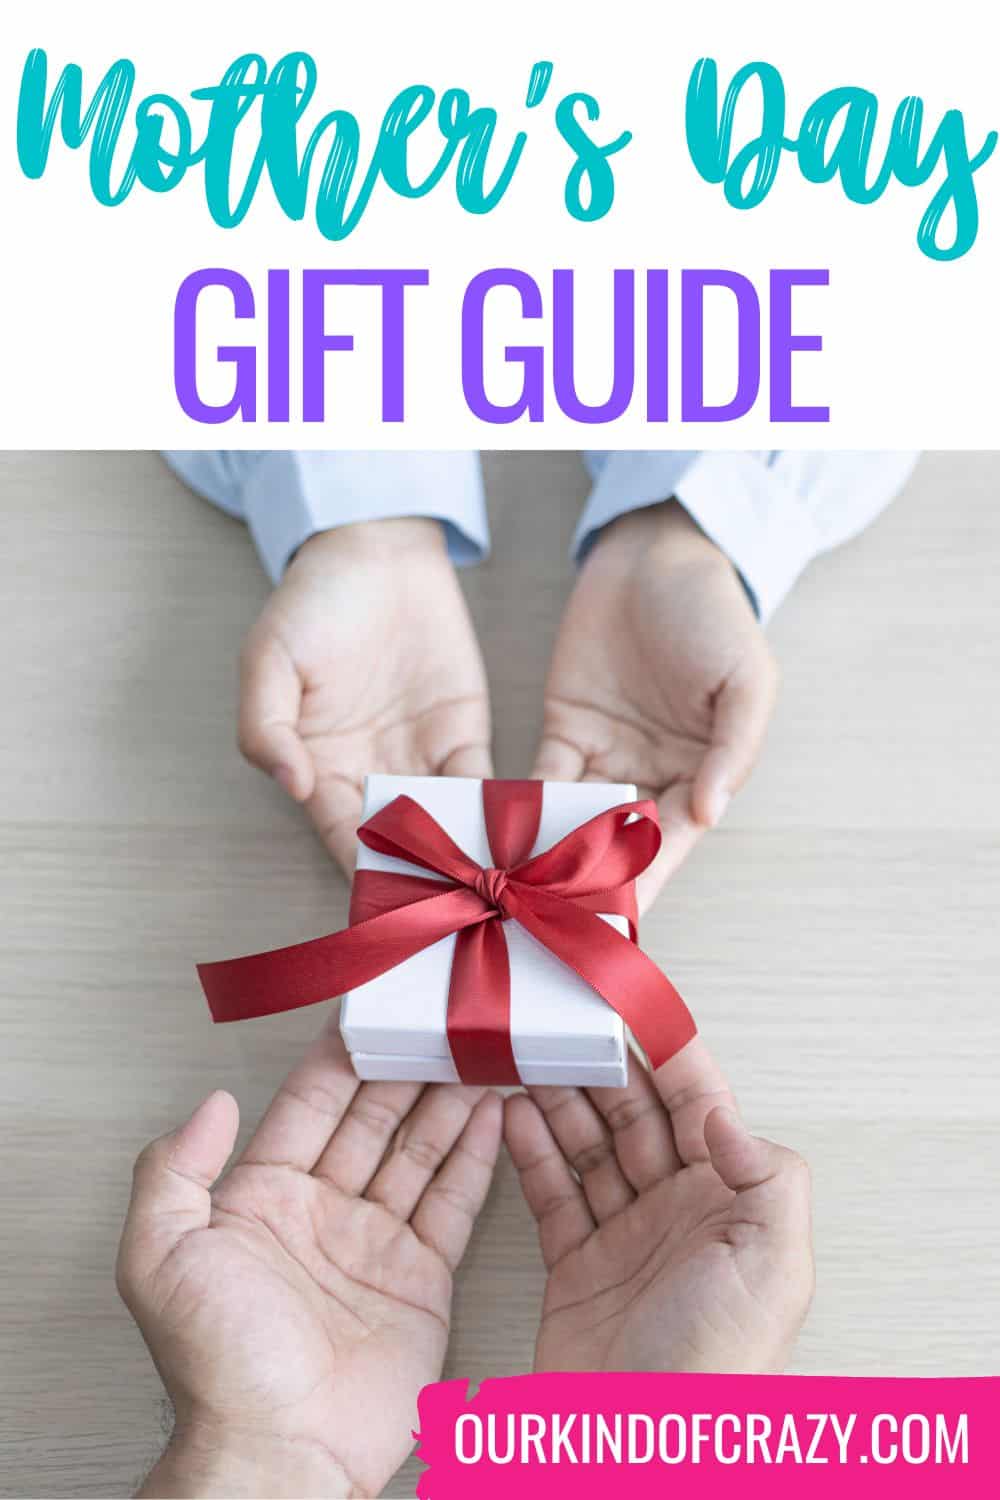 https://ourkindofcrazy.com/wp-content/uploads/2023/04/Mothers-Day-Gift-Guide.jpg